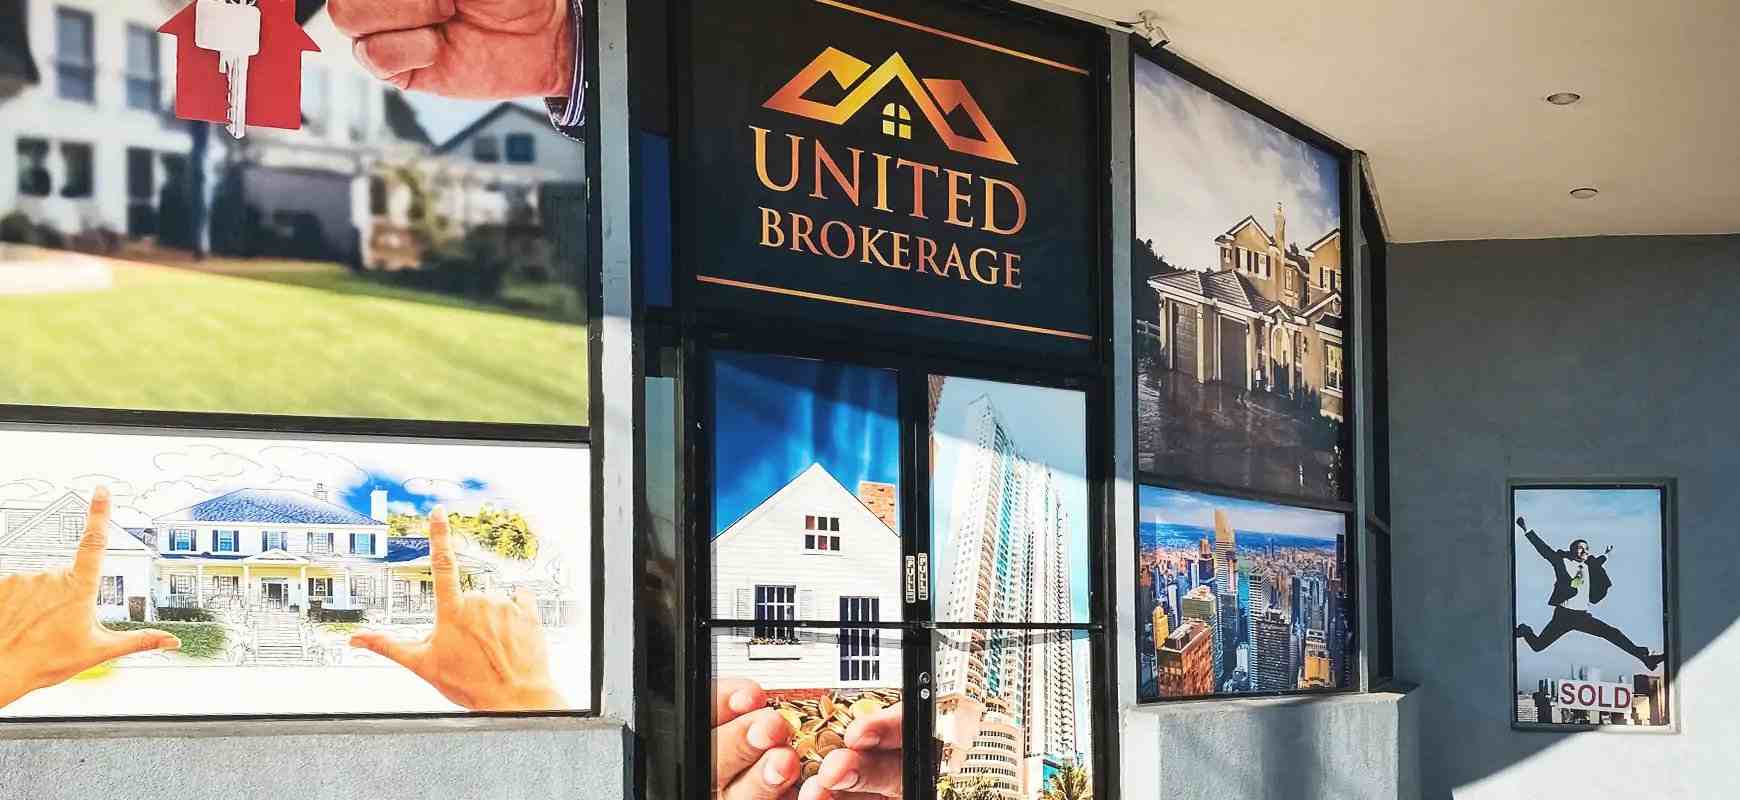 United Brokerage custom window decals in a promotional style made of opaque vinyl